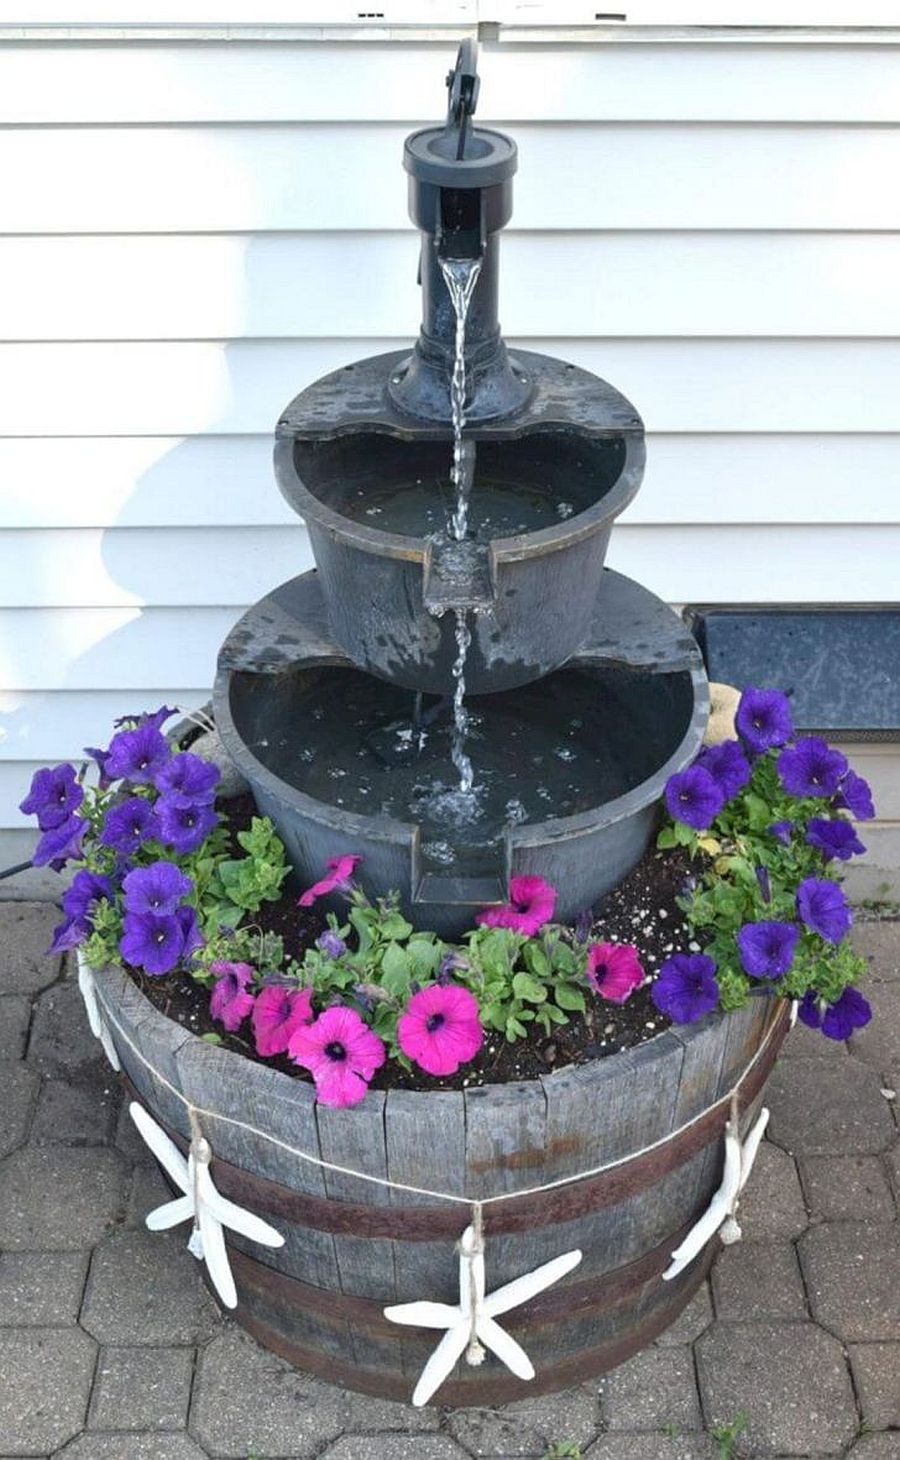 Flowers-add-color-to-the-outdoor-water-feature